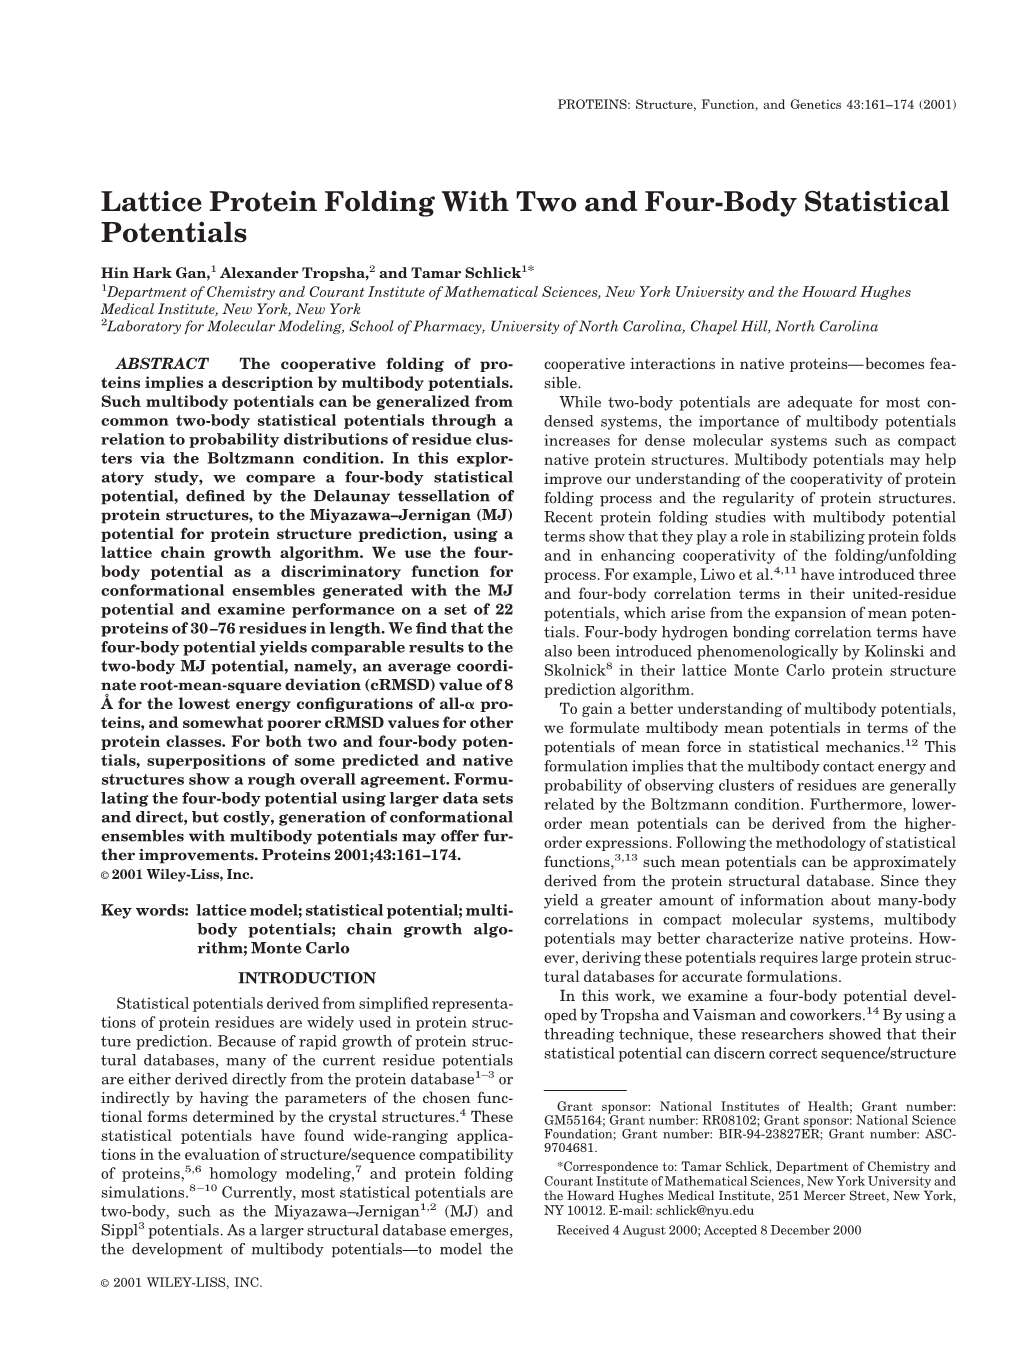 Lattice Protein Folding with Two and Four-Body Statistical Potentials